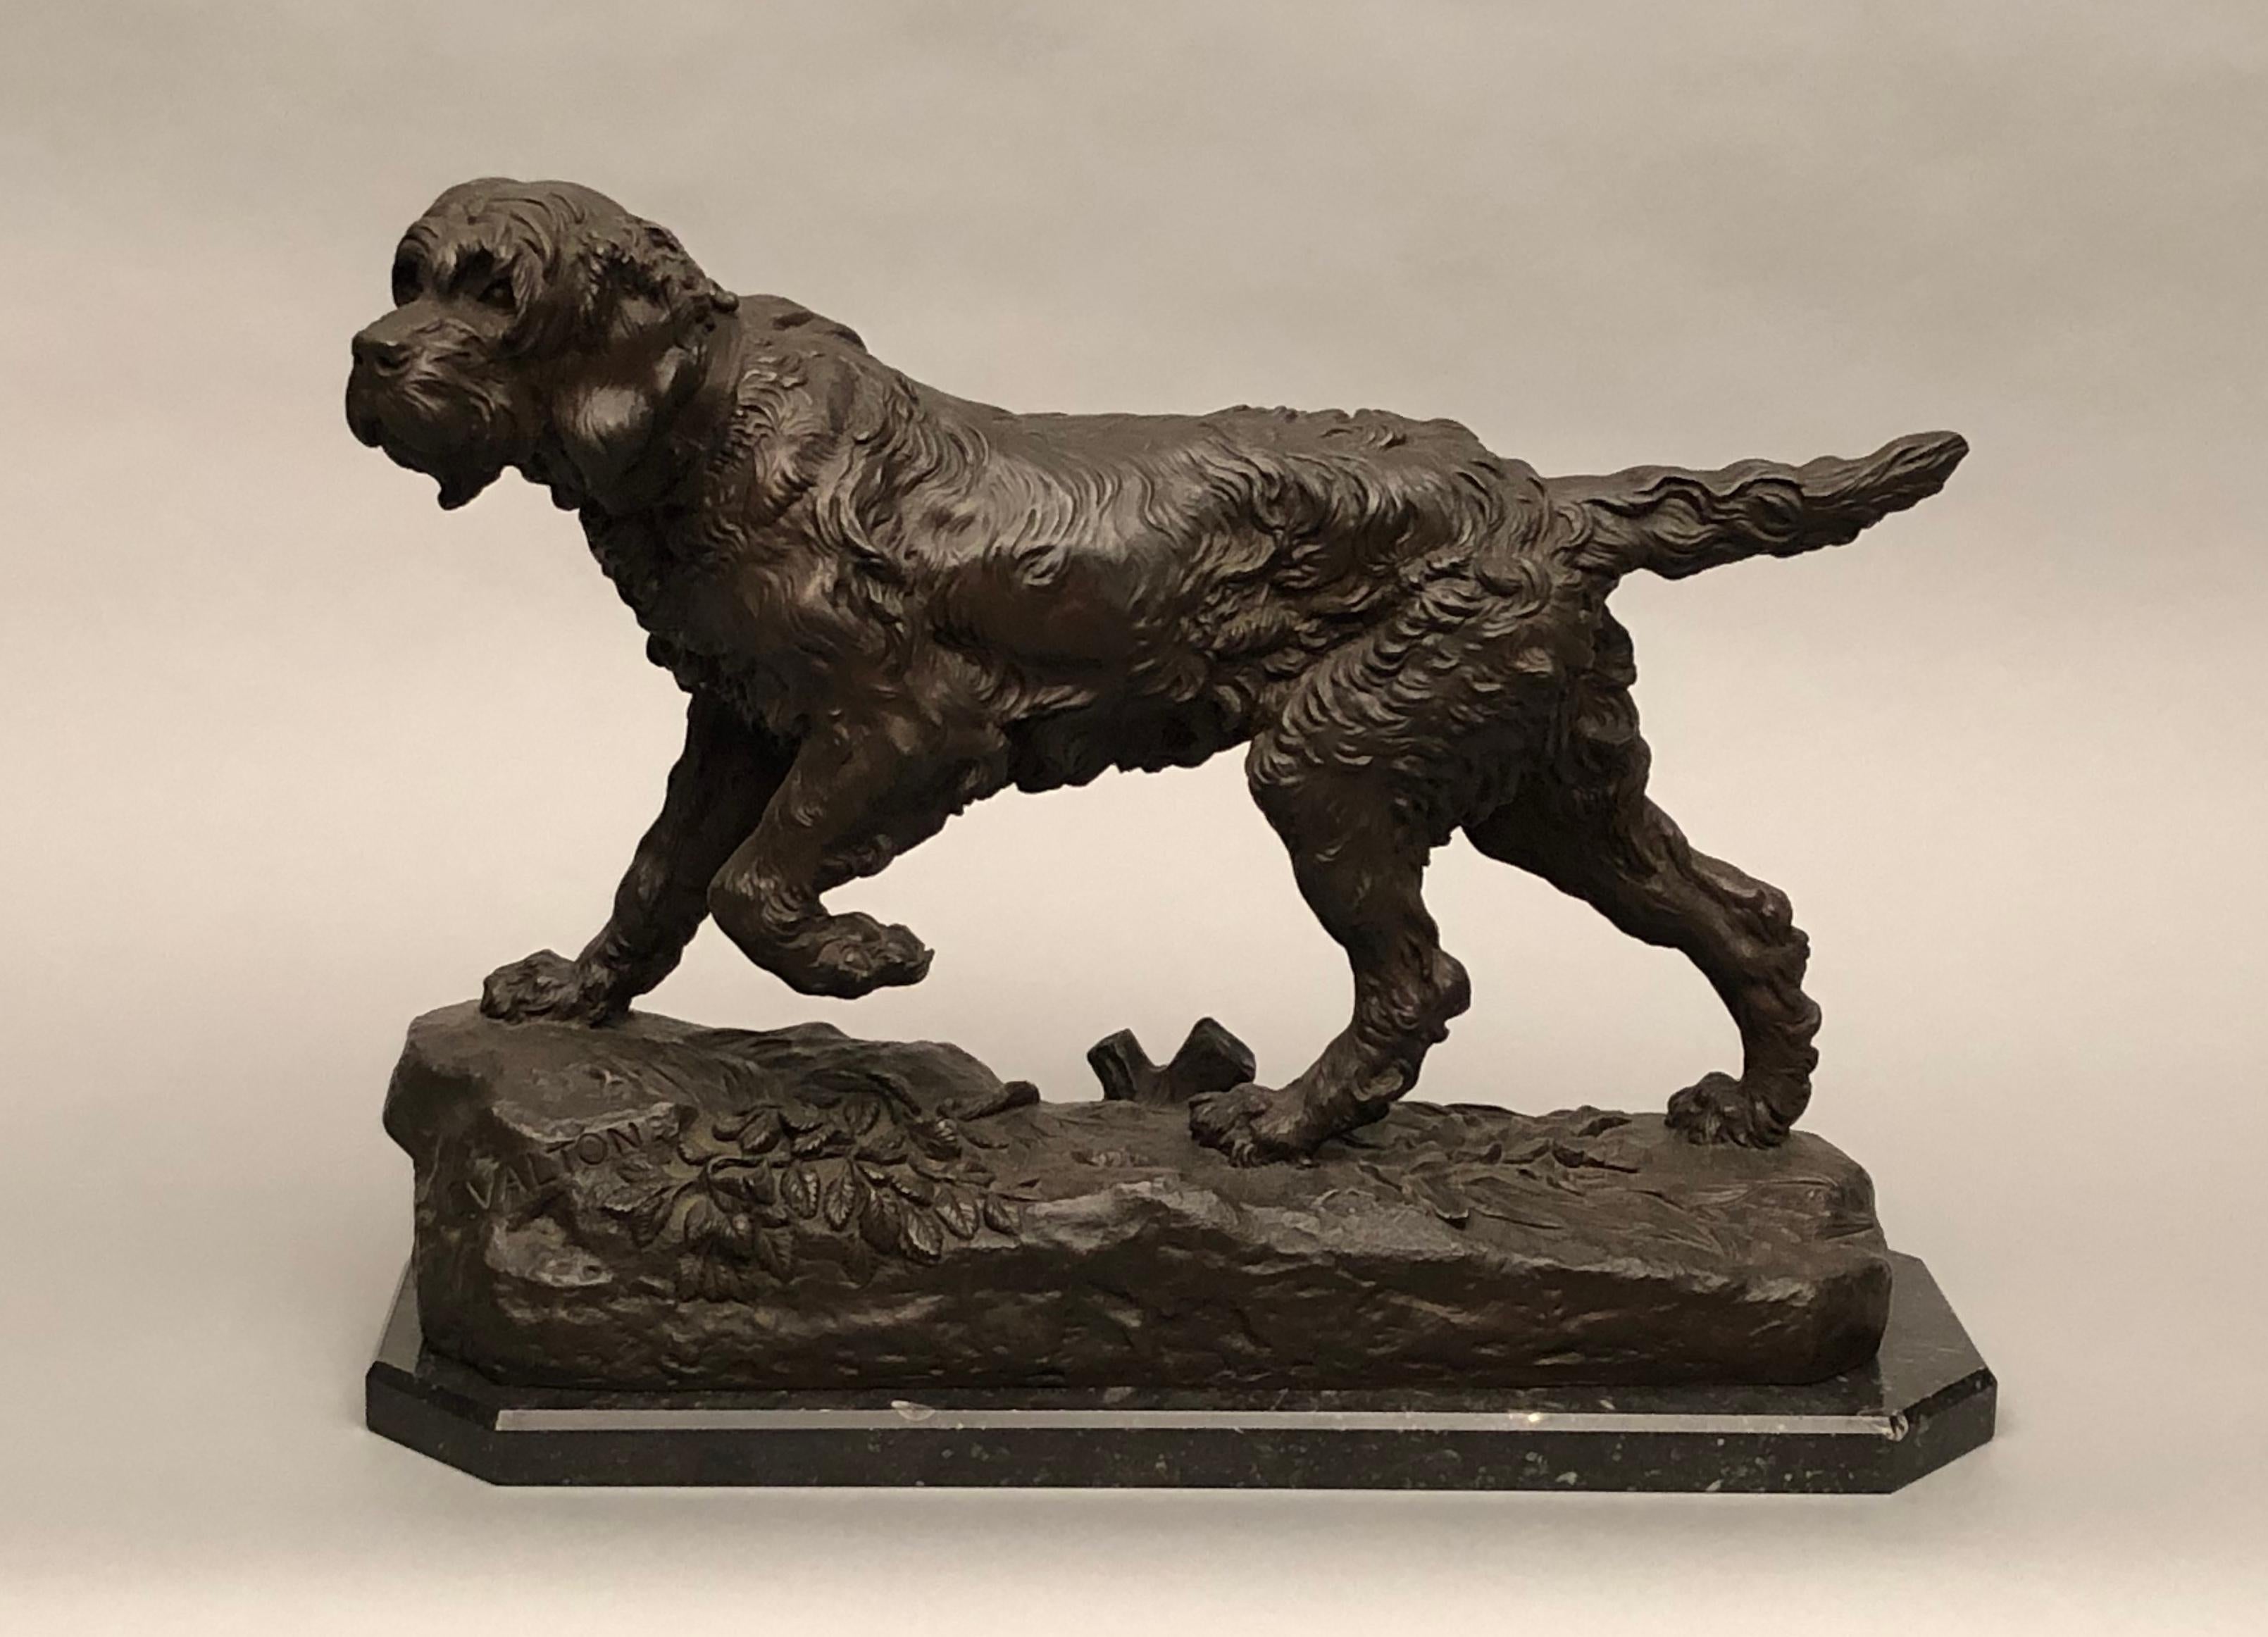 VALTON Charles. The Griffin Marco. Patinated bronze. Marble base. Signed.